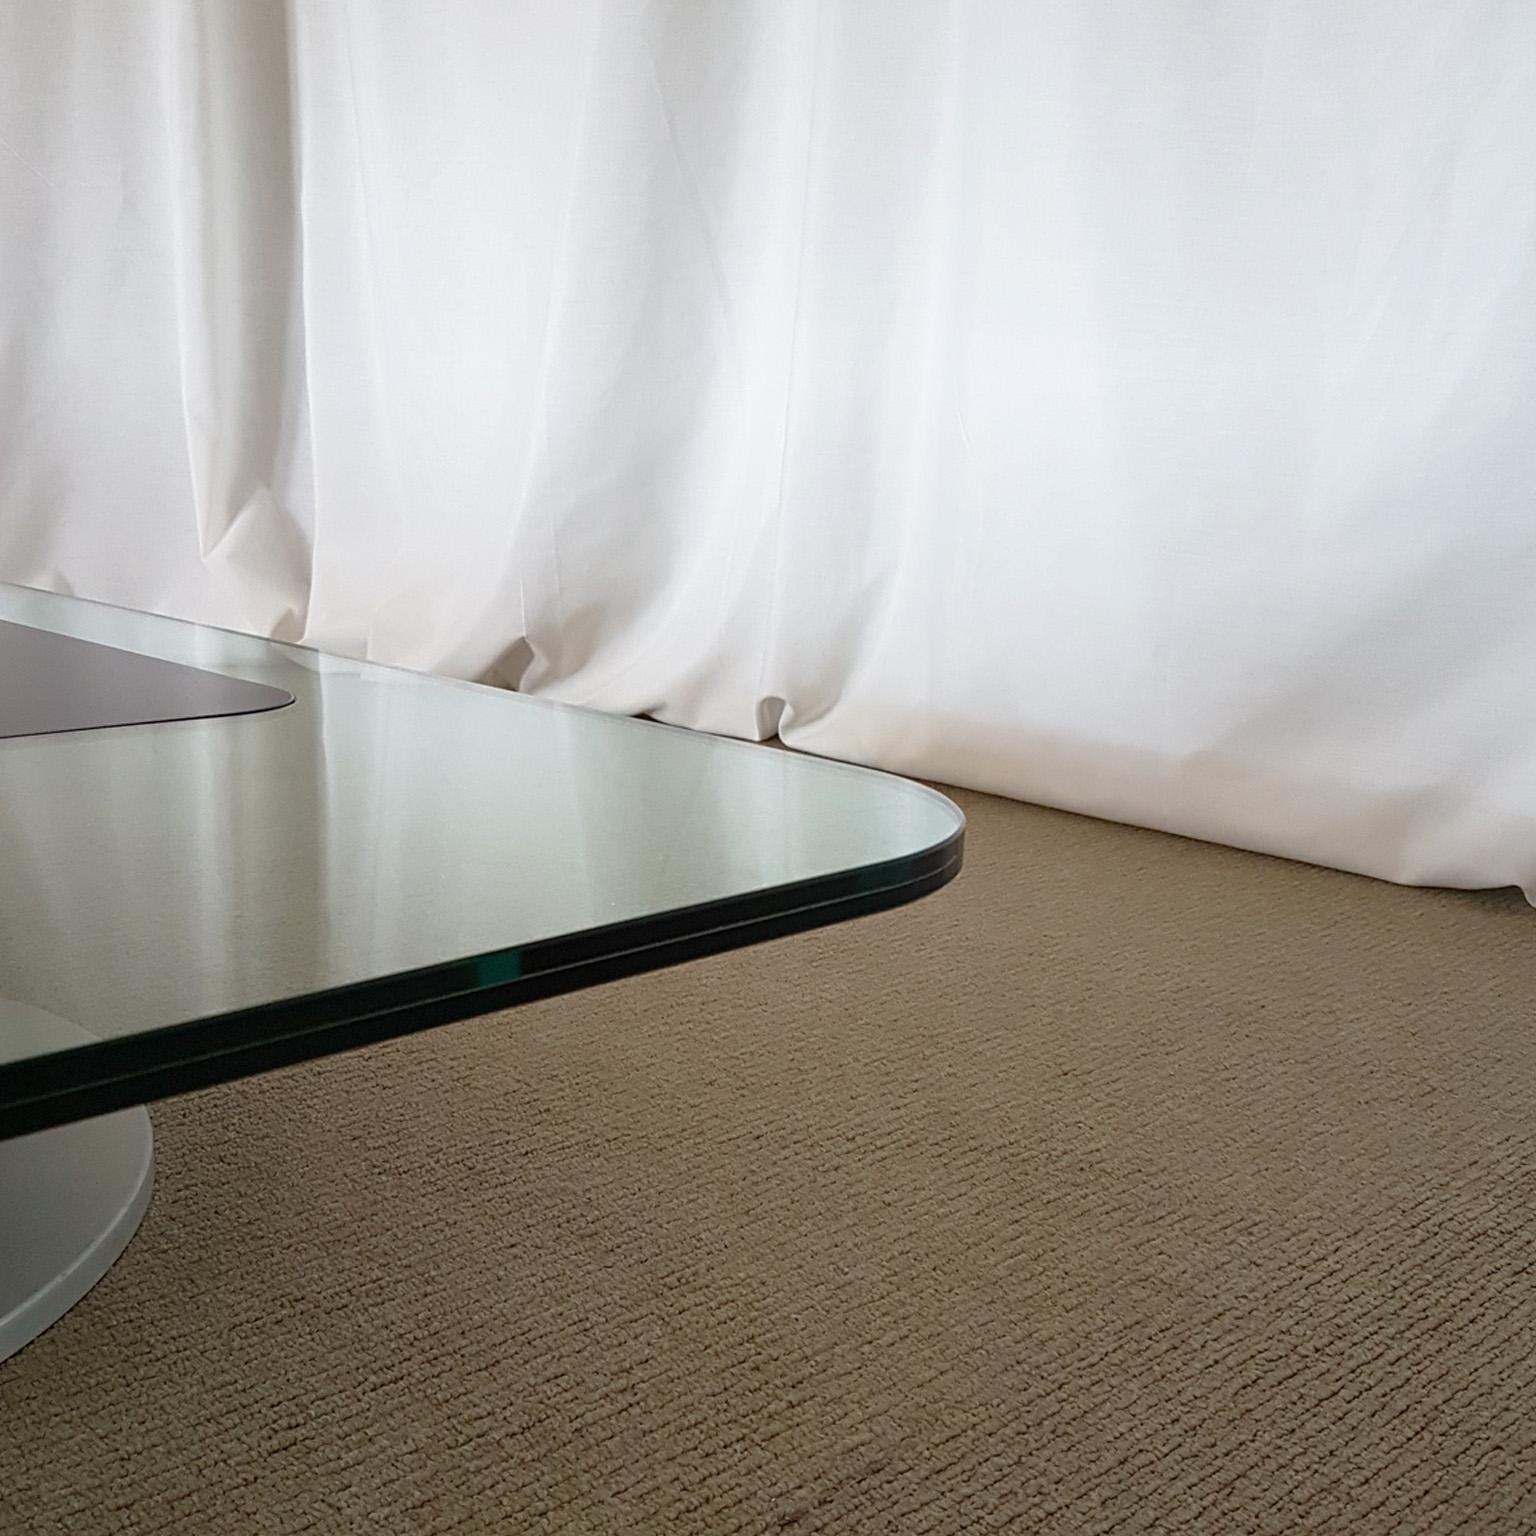 Italian Tempered Crystal Centre Table with Wood Insert, 21st Century For Sale 1